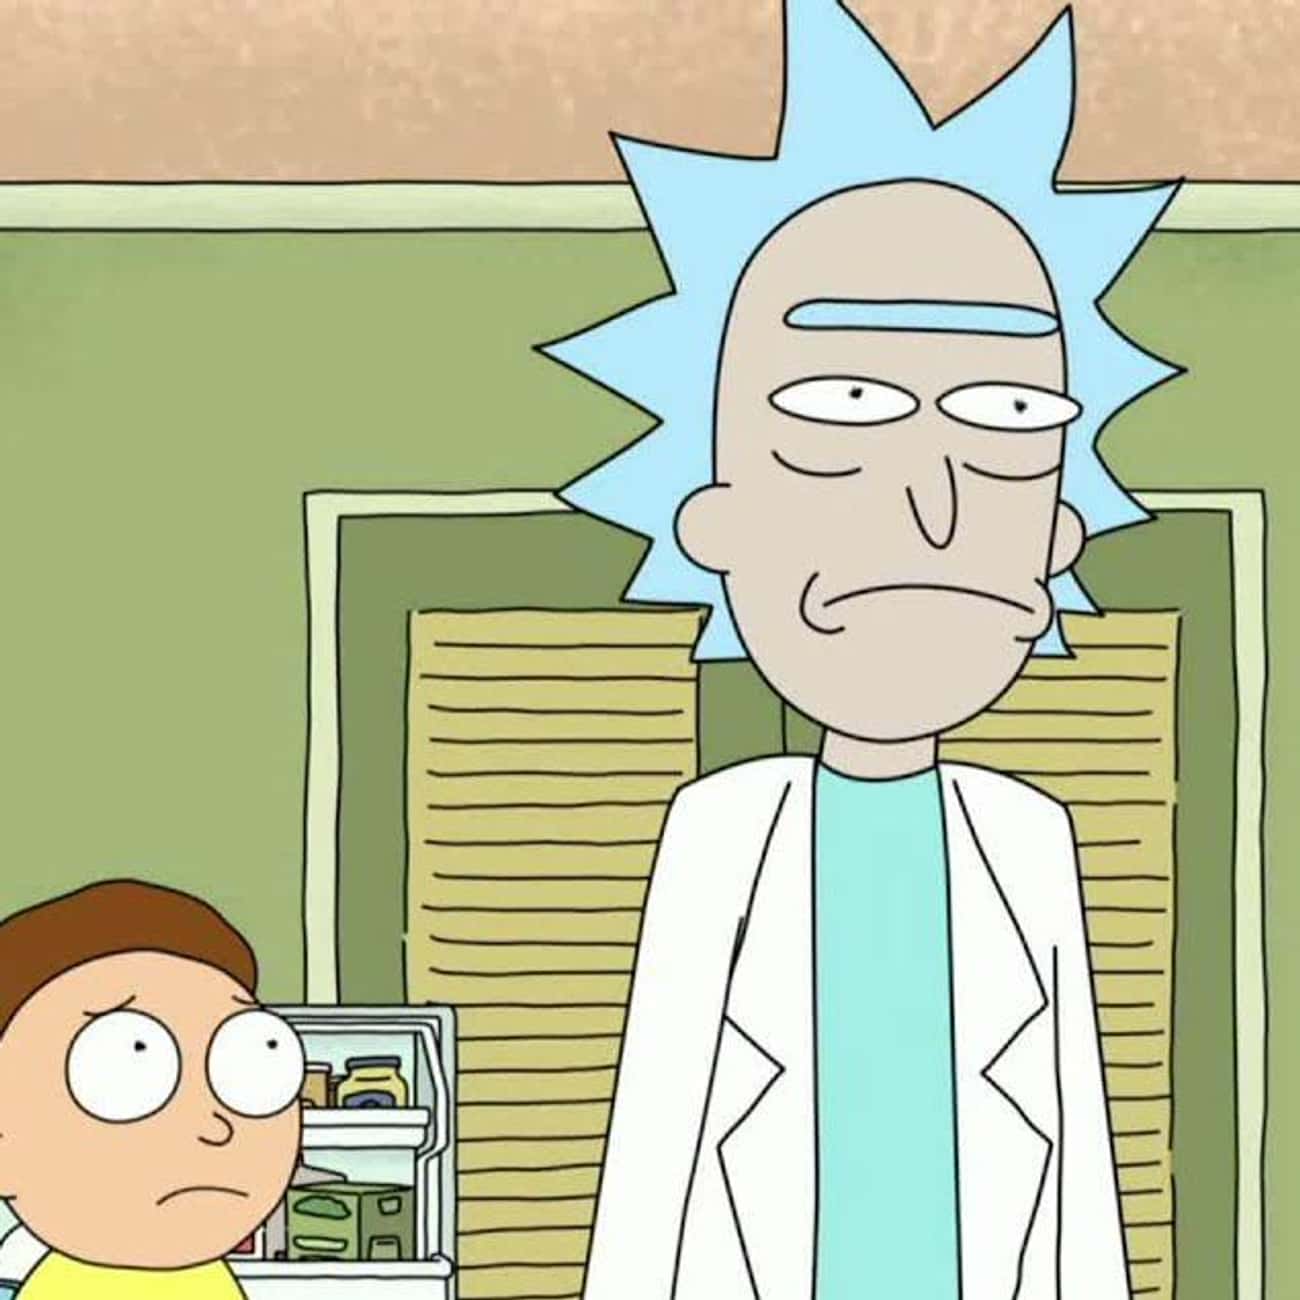 The Top Quotes From 'Rick and Morty' That You Can't Miss